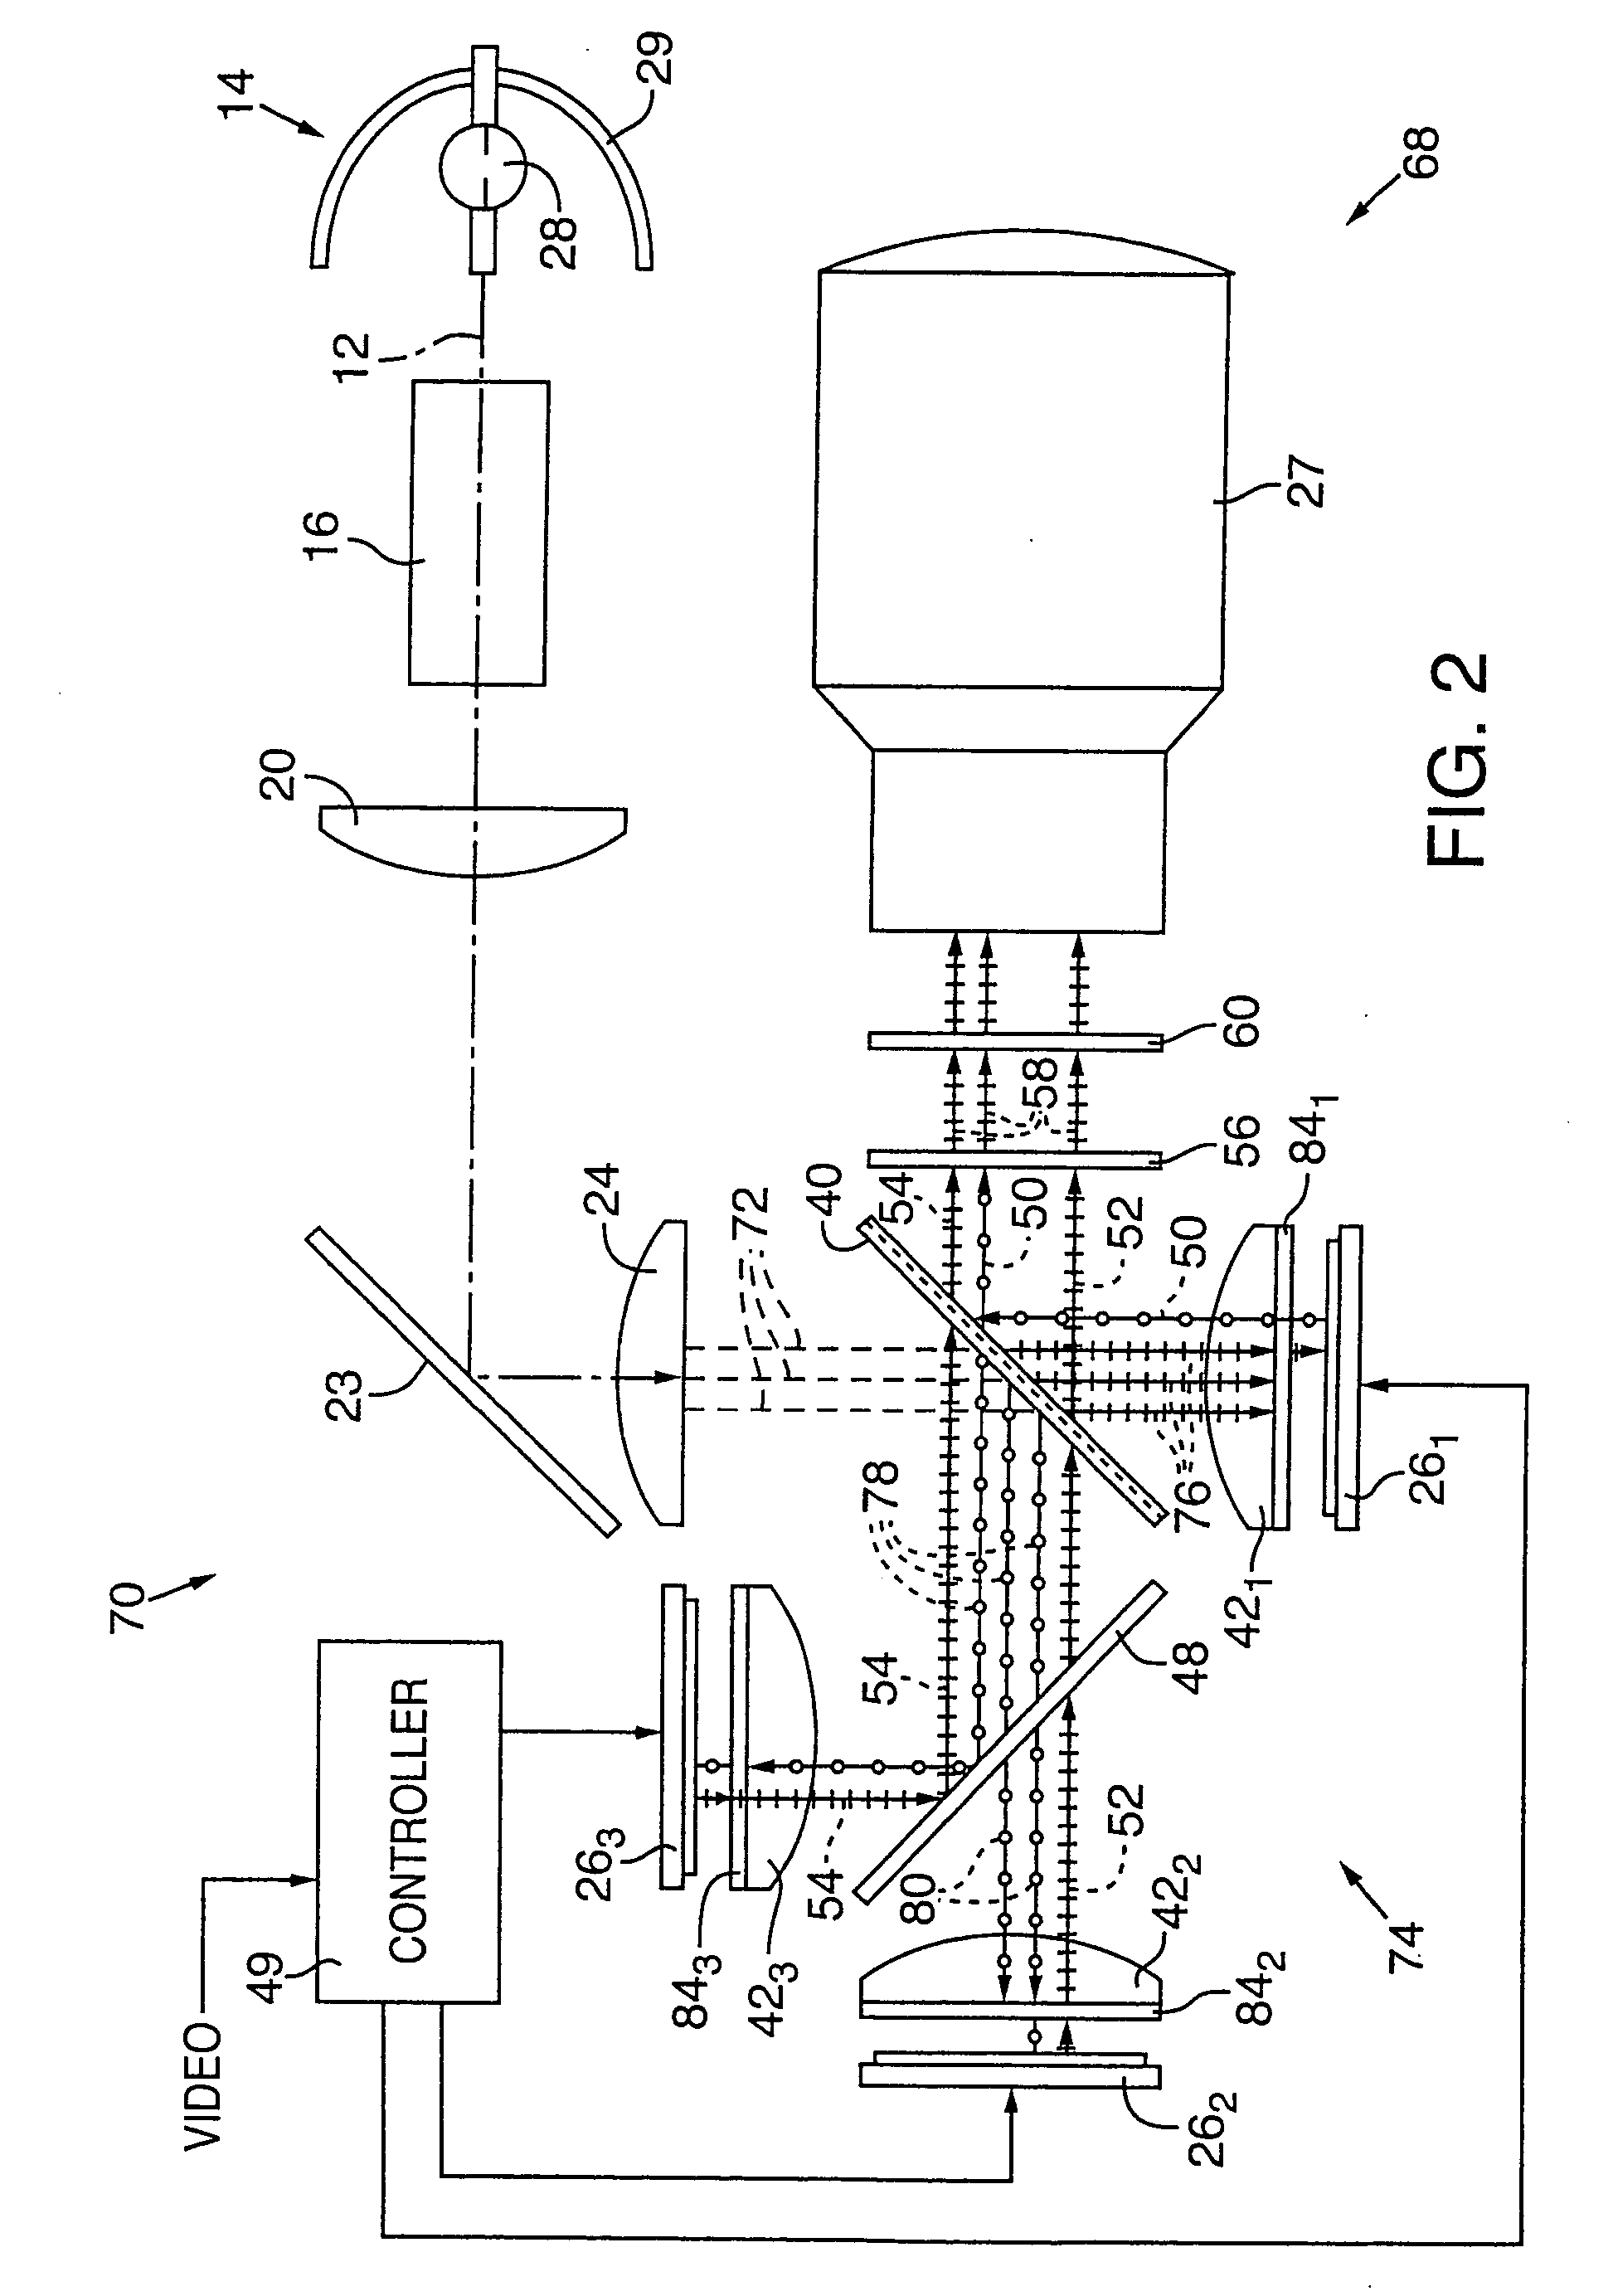 Color video projection system employing reflective liquid crystal display devices